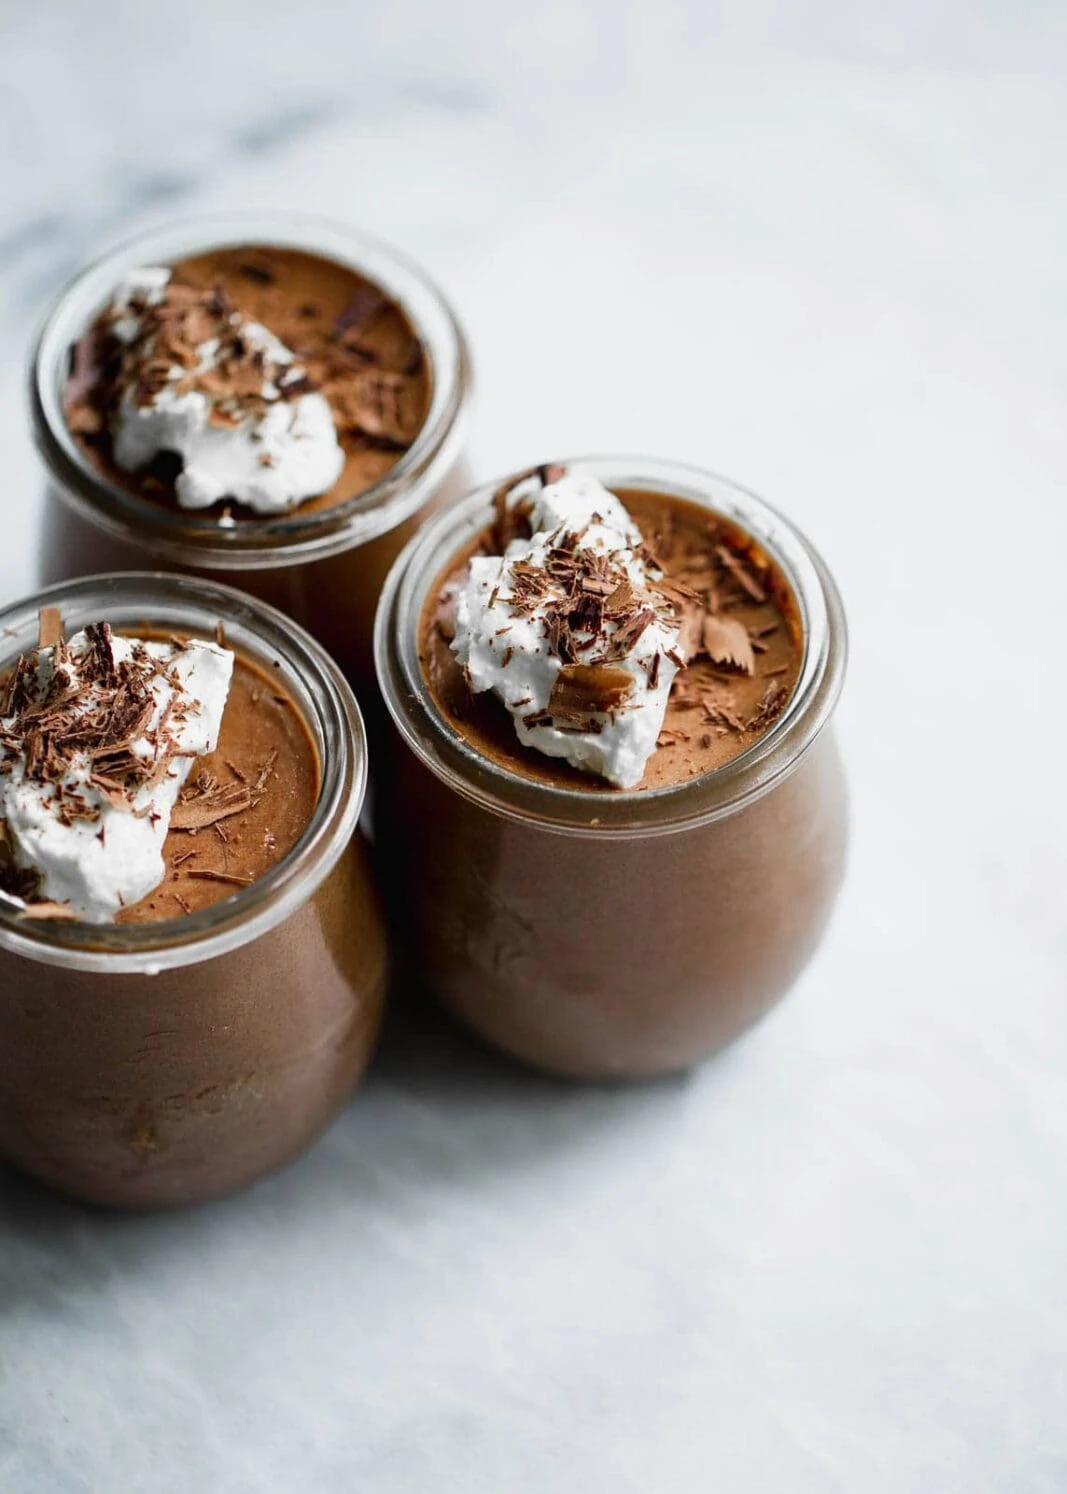 Easy Healthy Chocolate Mousse - Broma Bakery